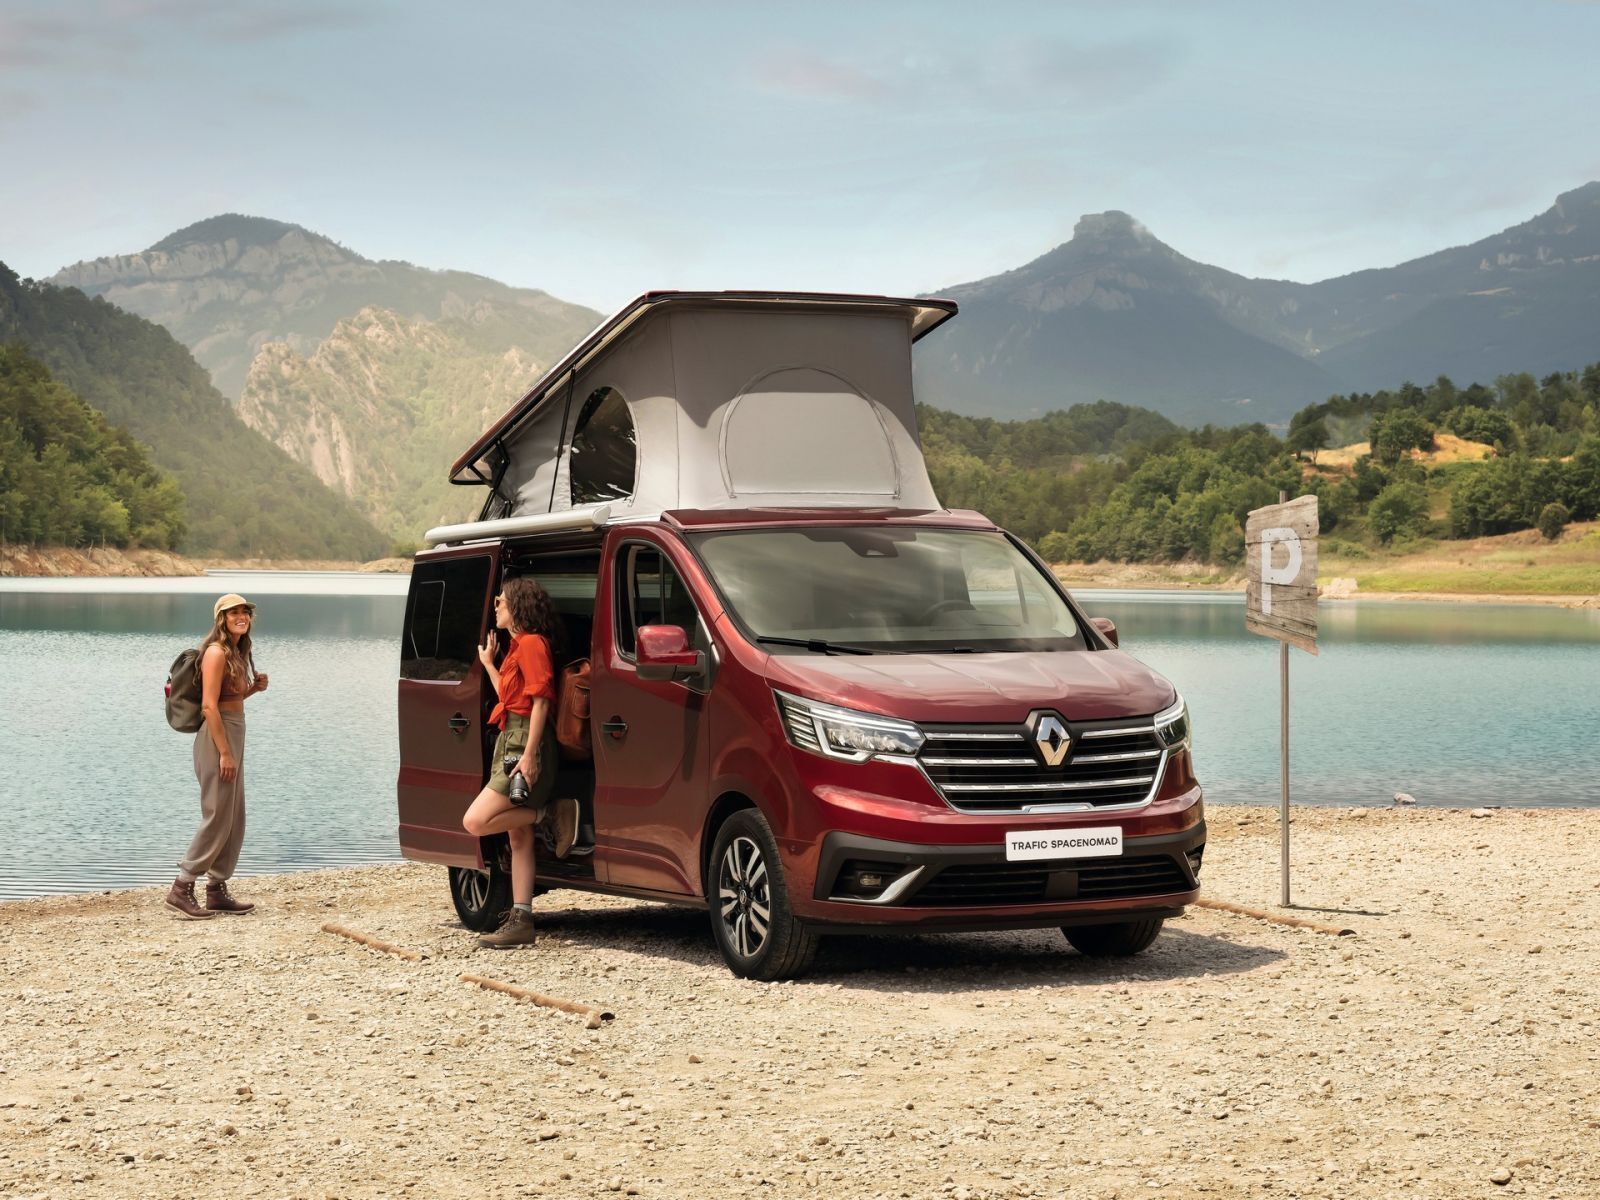 Renault Trafic SpaceNomad and Hippie Caviar Hotel concept